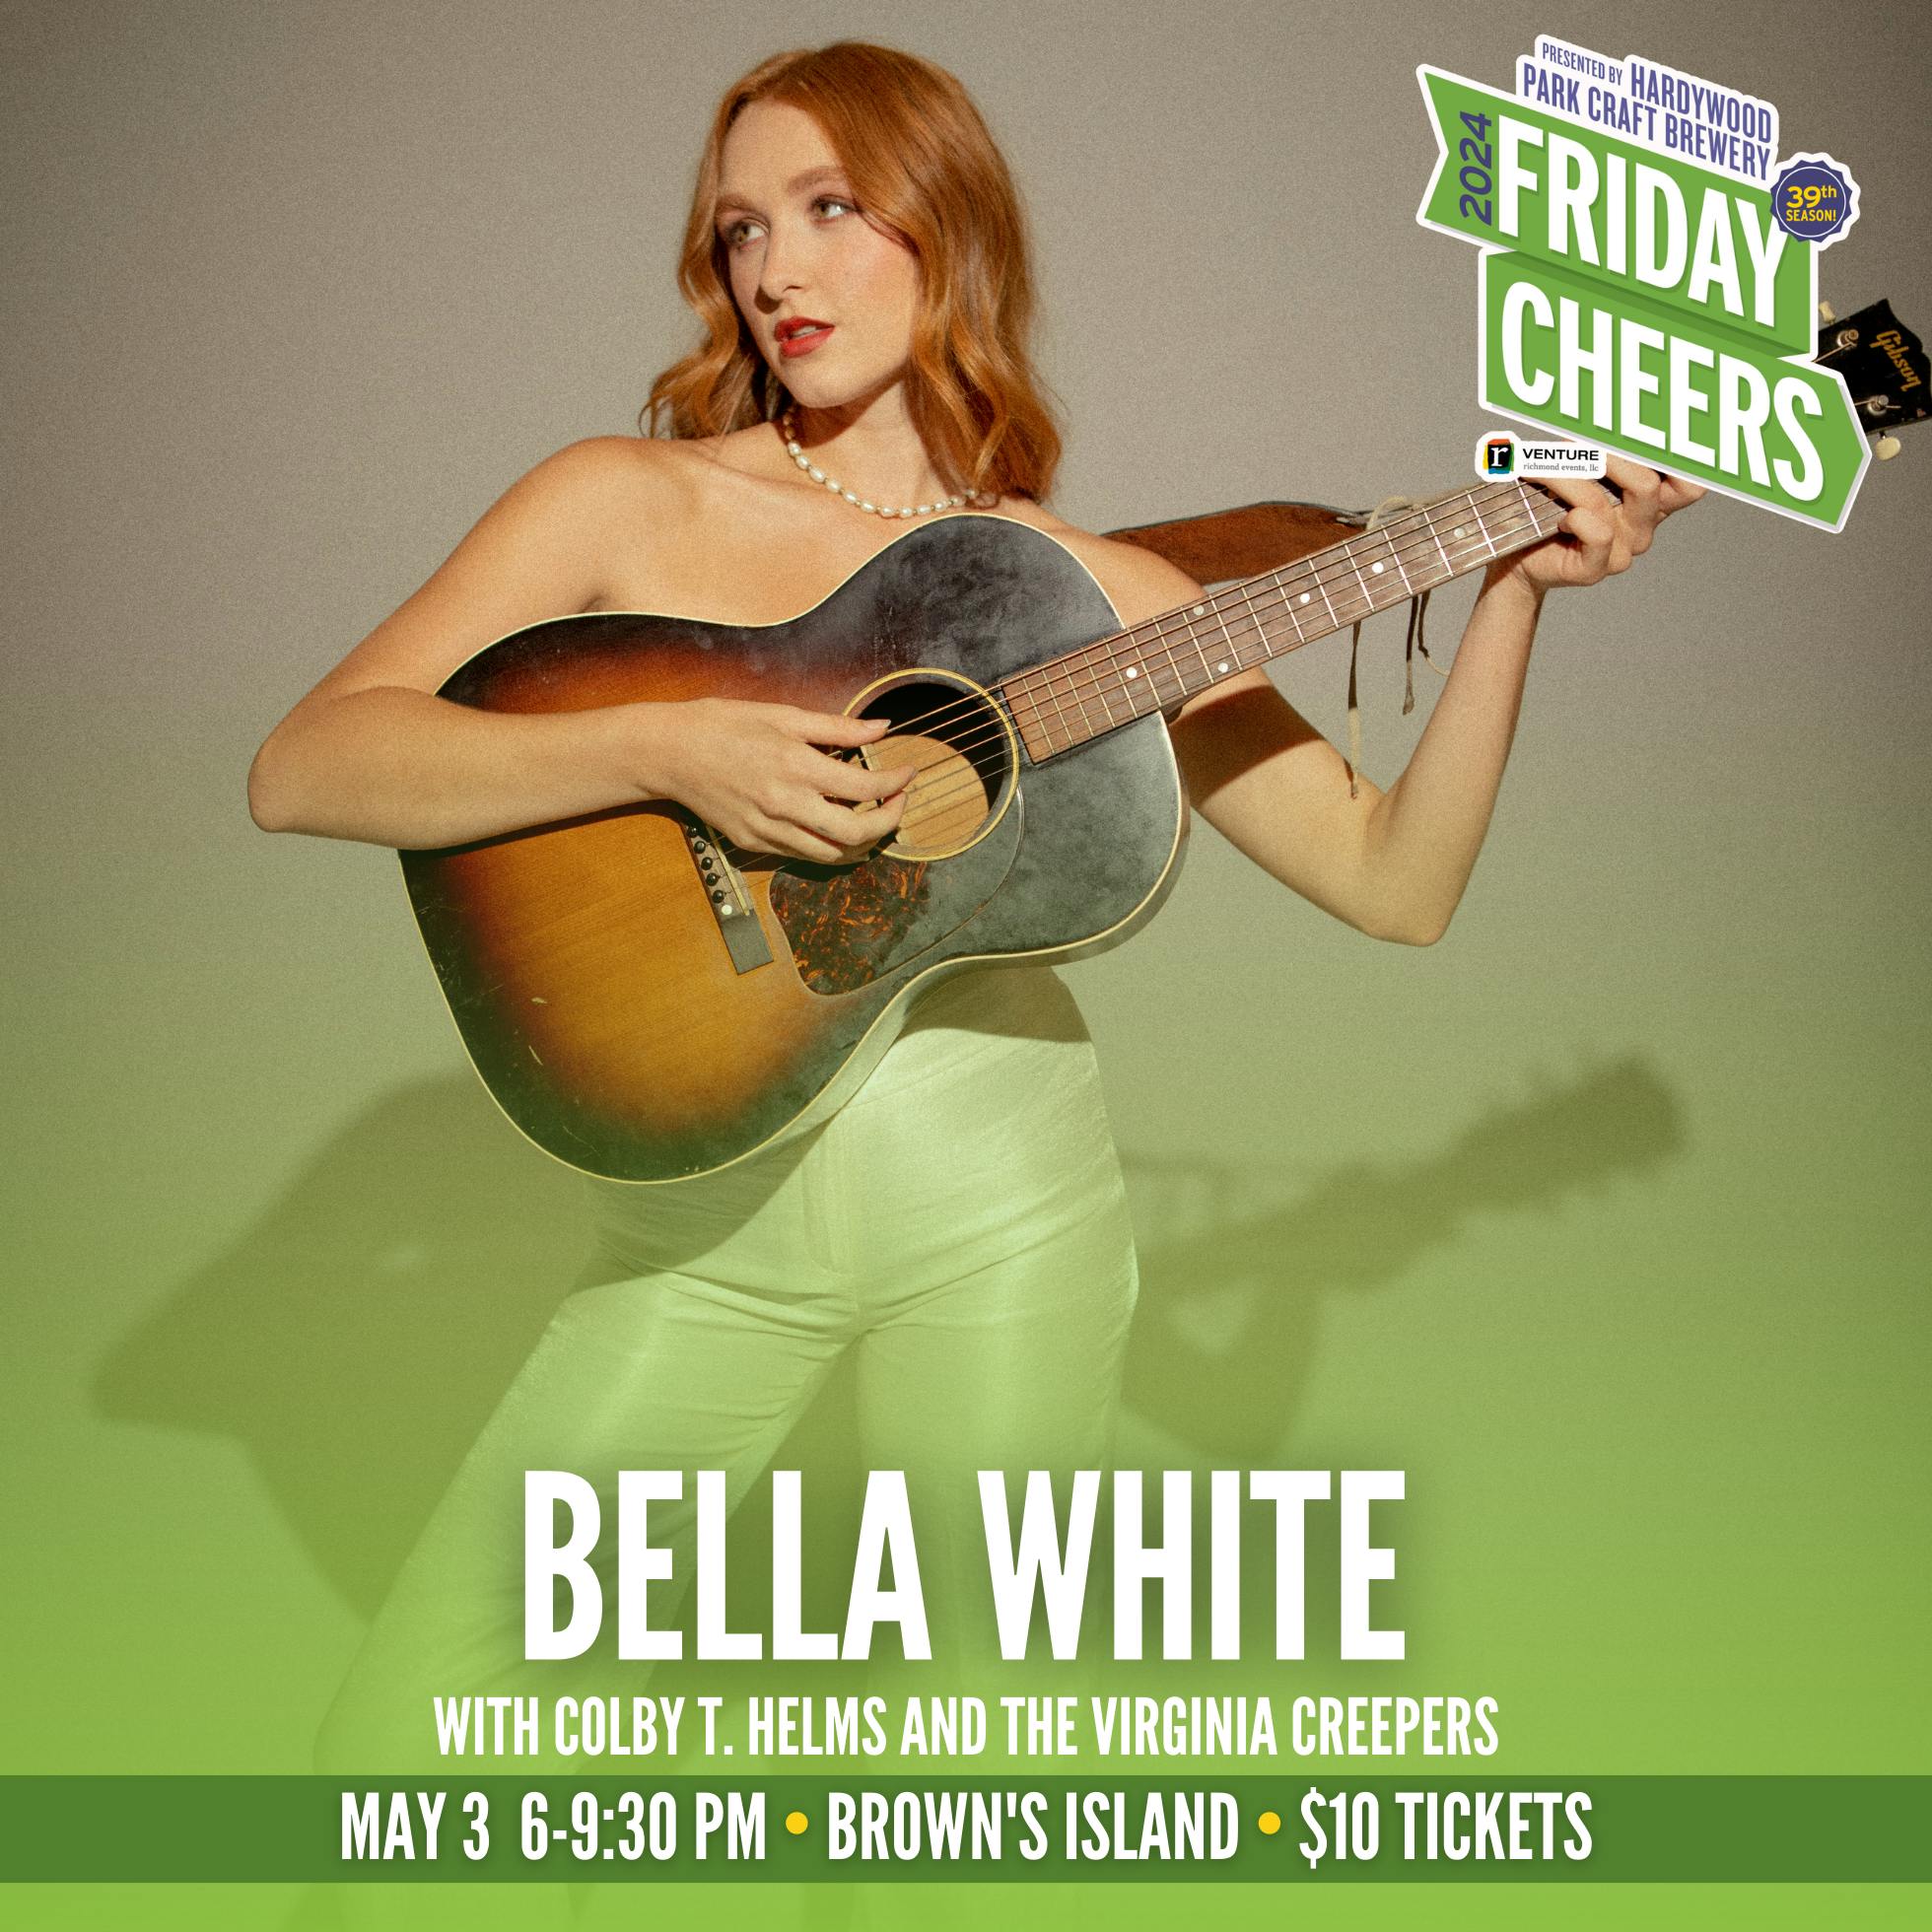 Bella White with Colby T. Helms & The Virginia Creepers